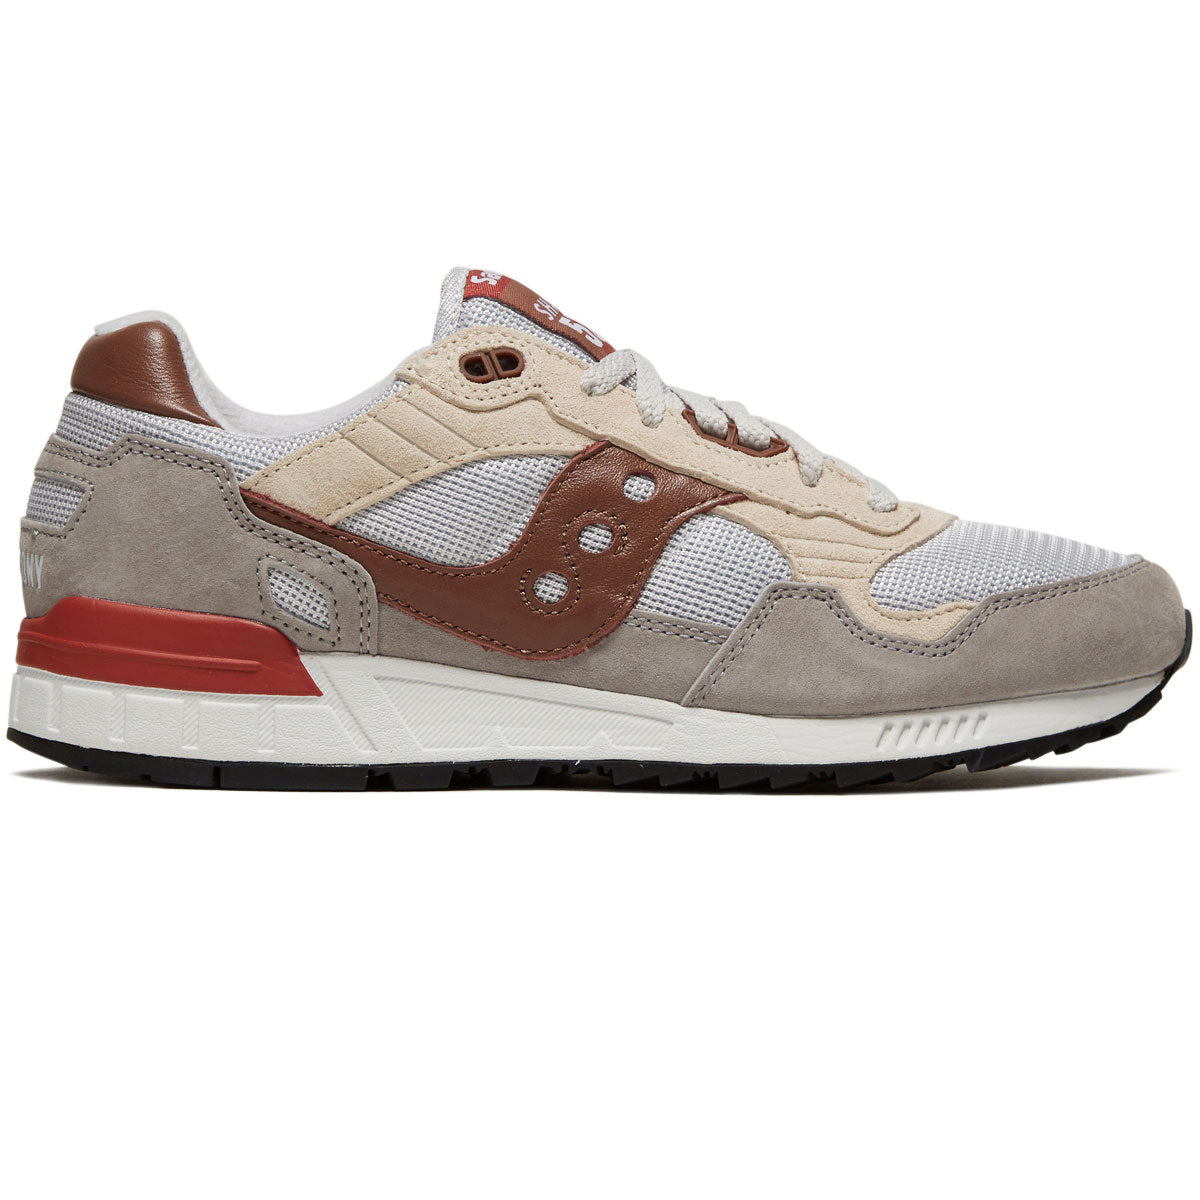 Saucony Shadow 5000 Shoes - Grey/Brown image 1